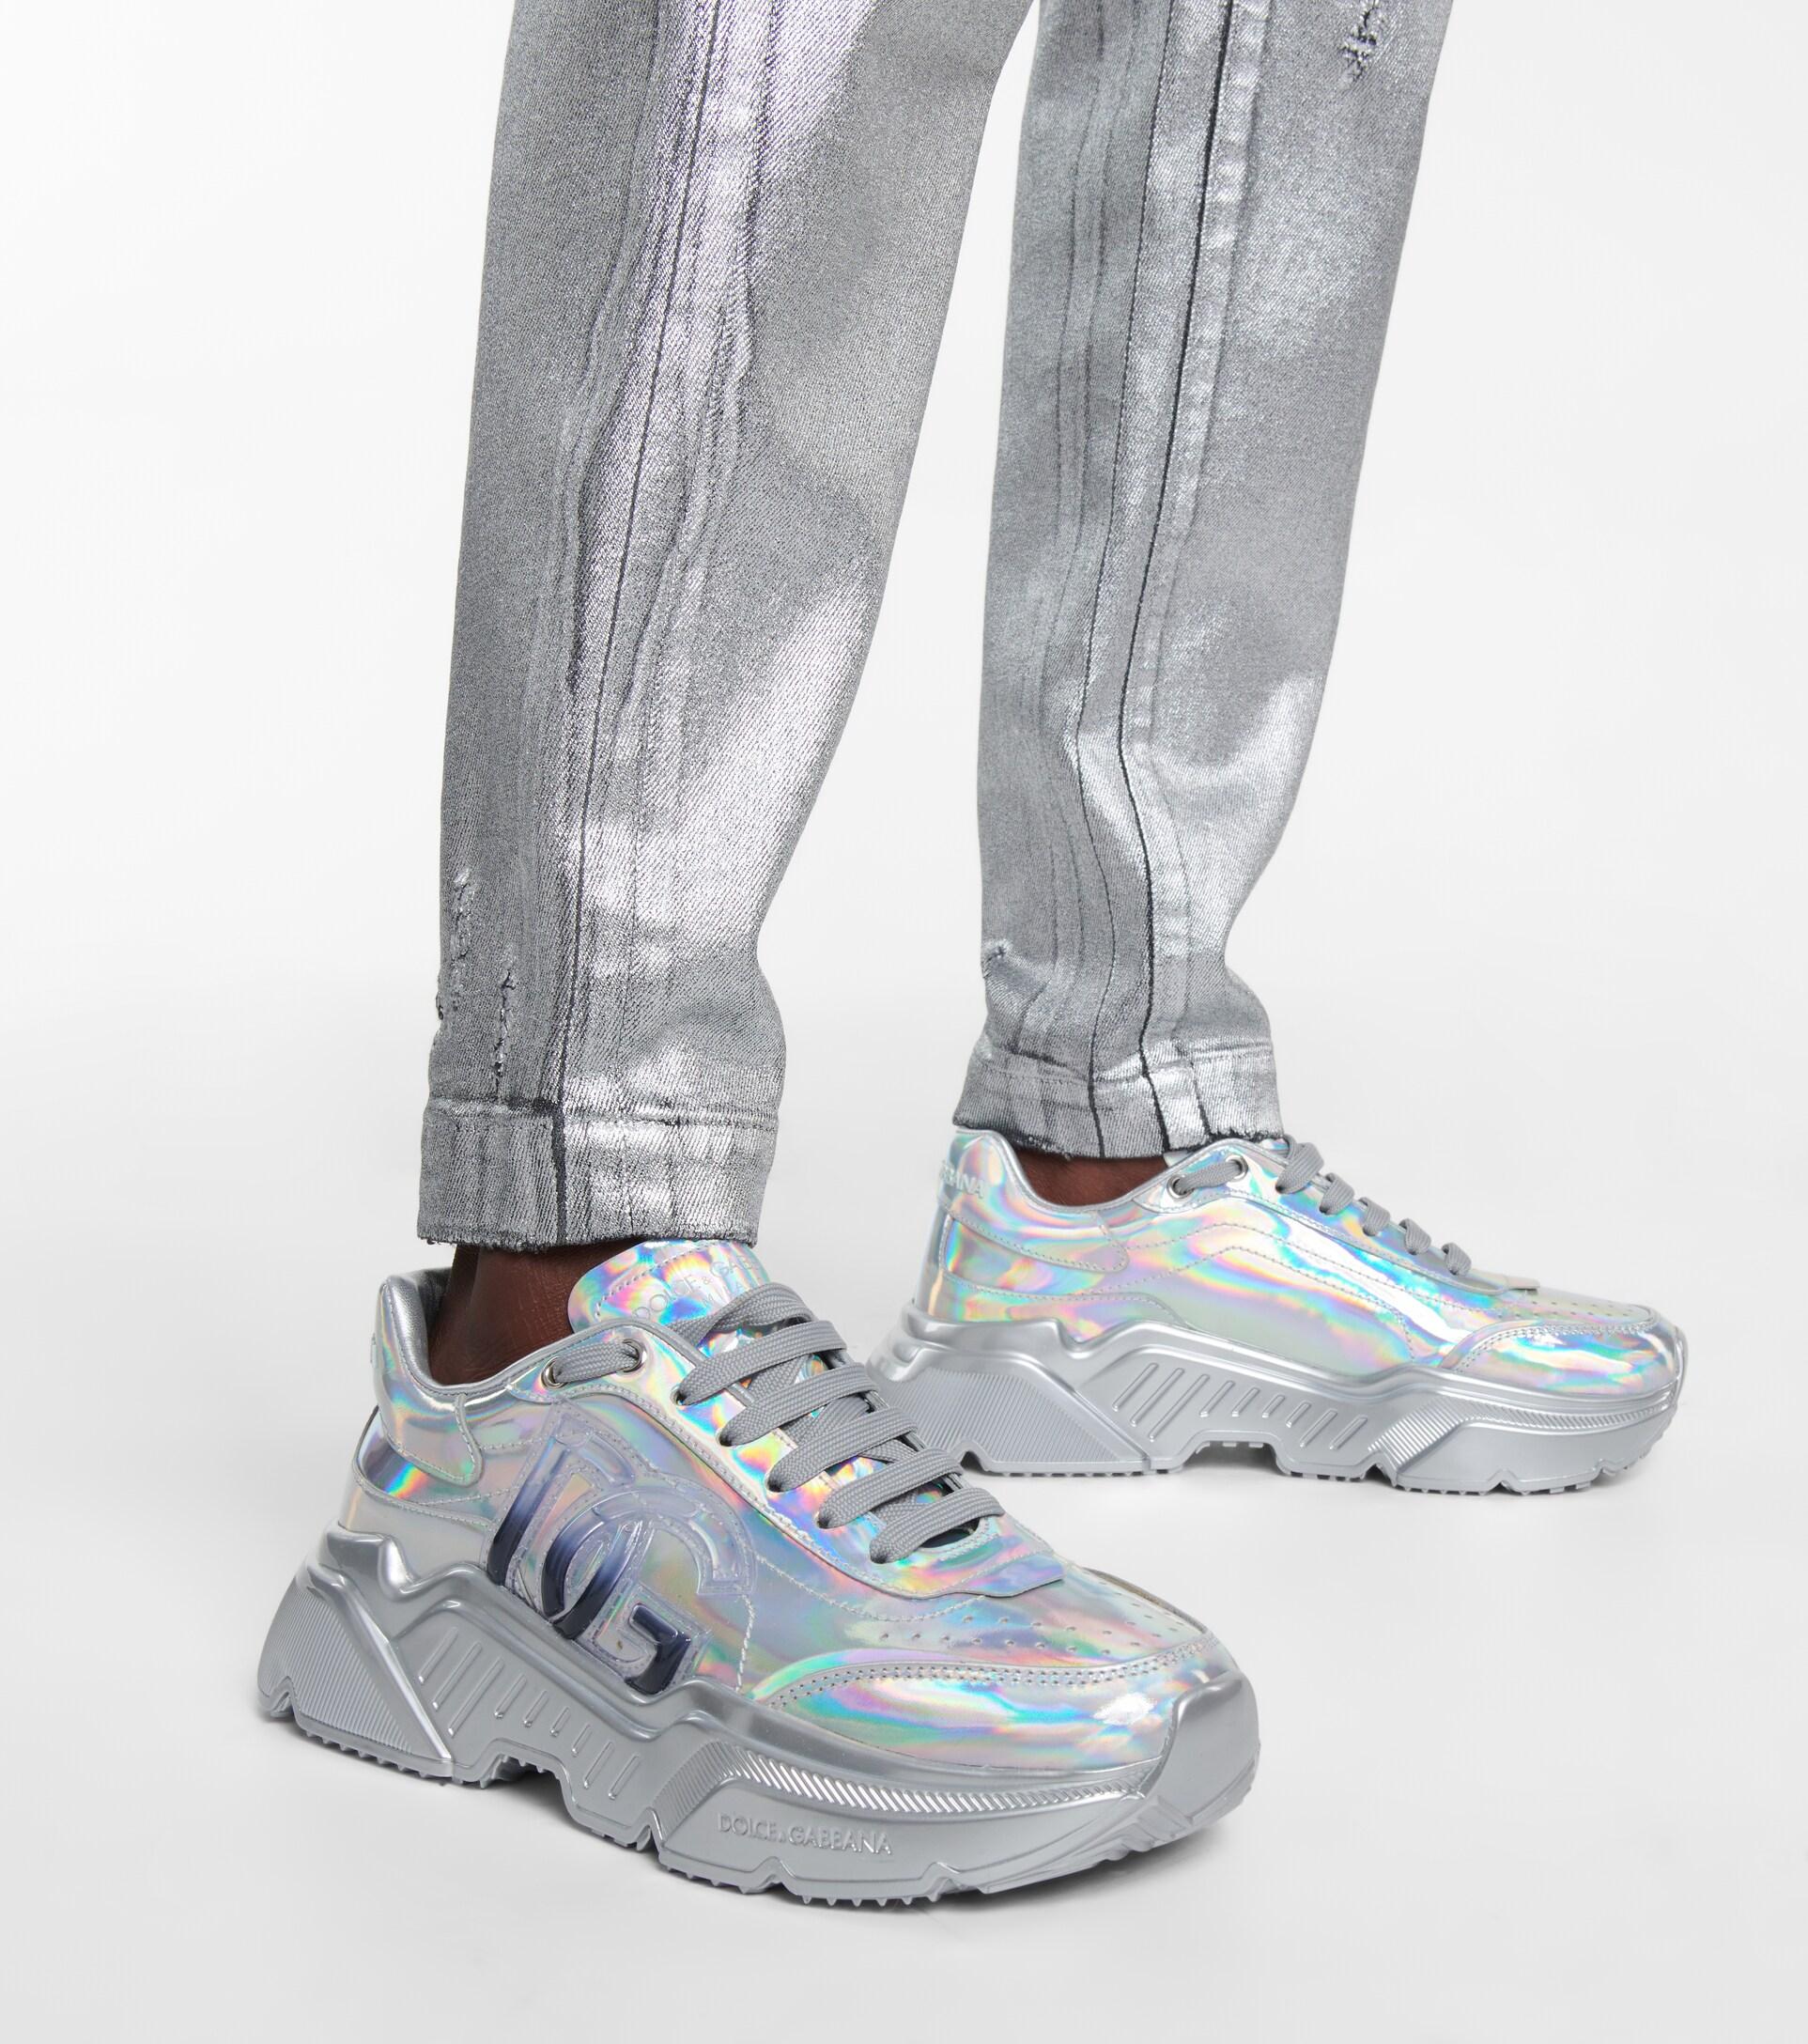 Make A Statement In These Holographic Fila Disruptors | The Sole Supplier